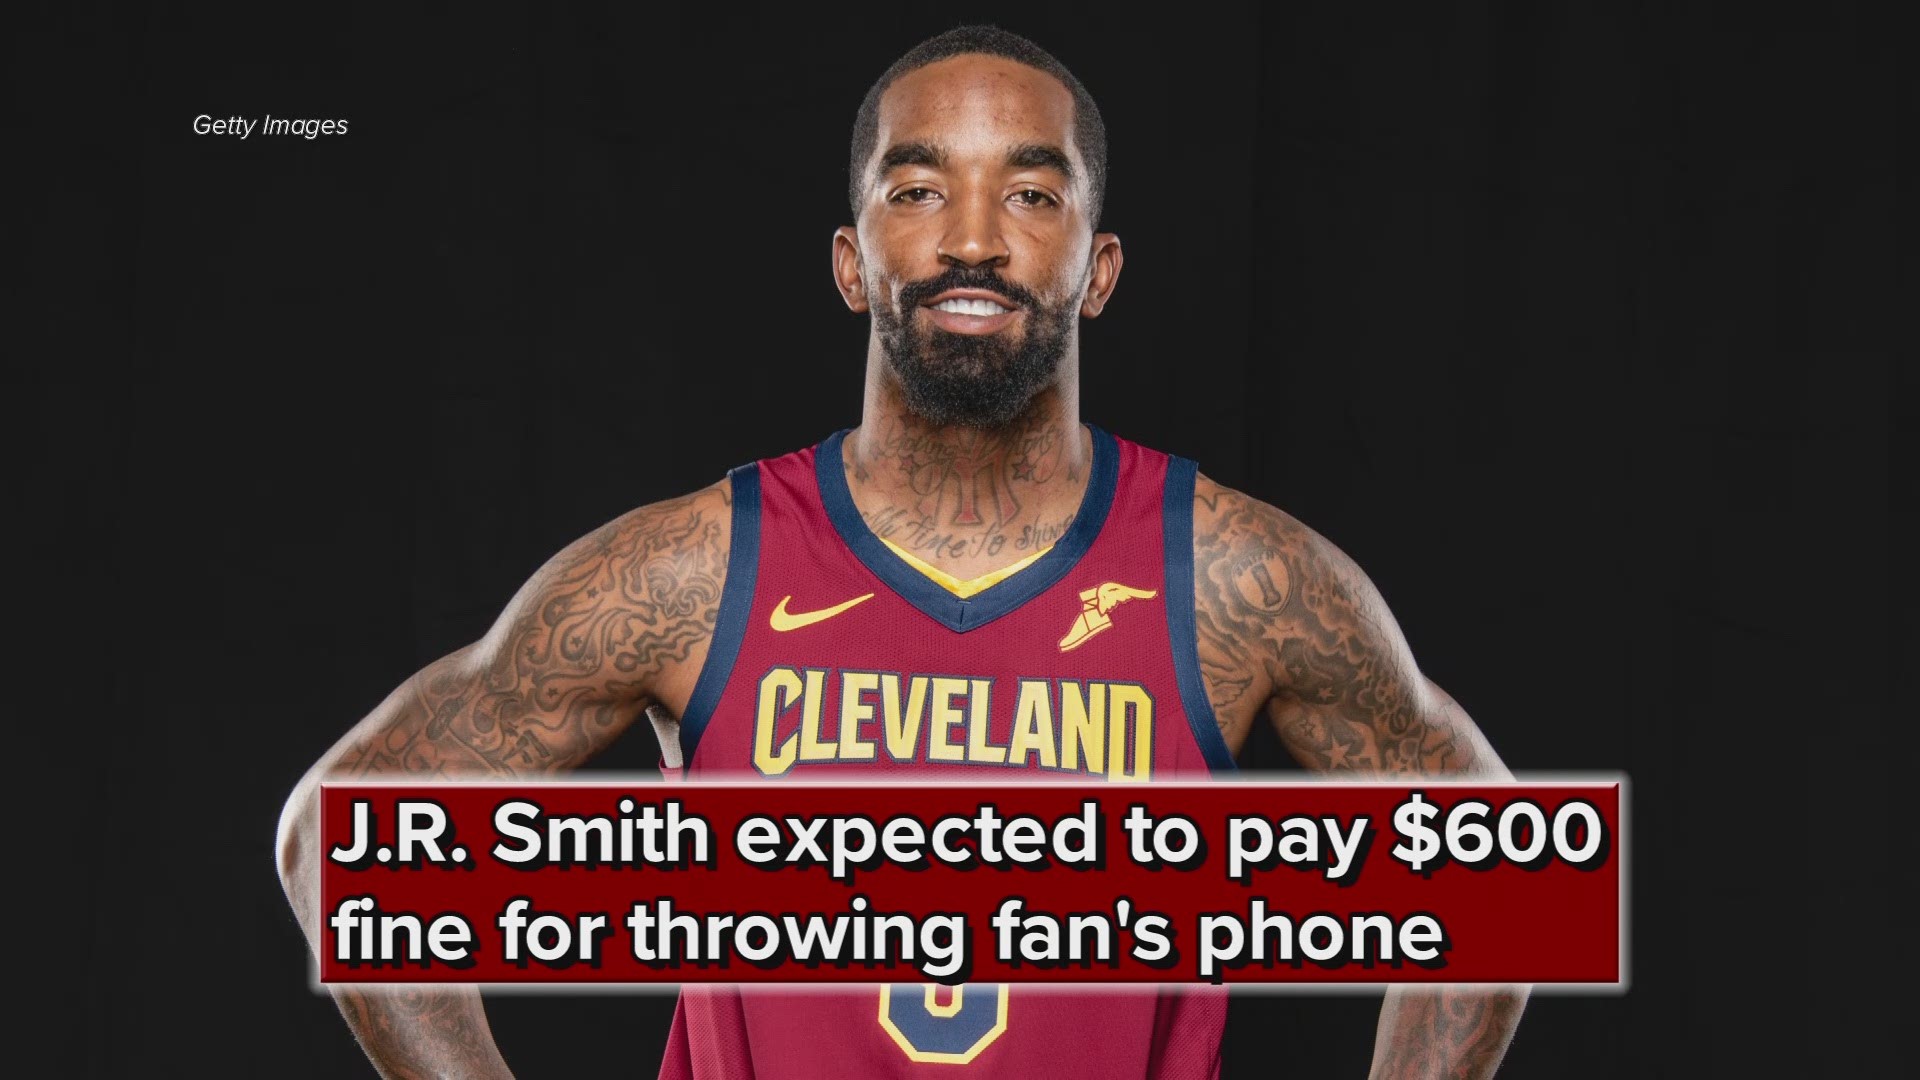 Cleveland Cavaliers G J.R. Smith expected to pay $600 fine for throwing fan's phone